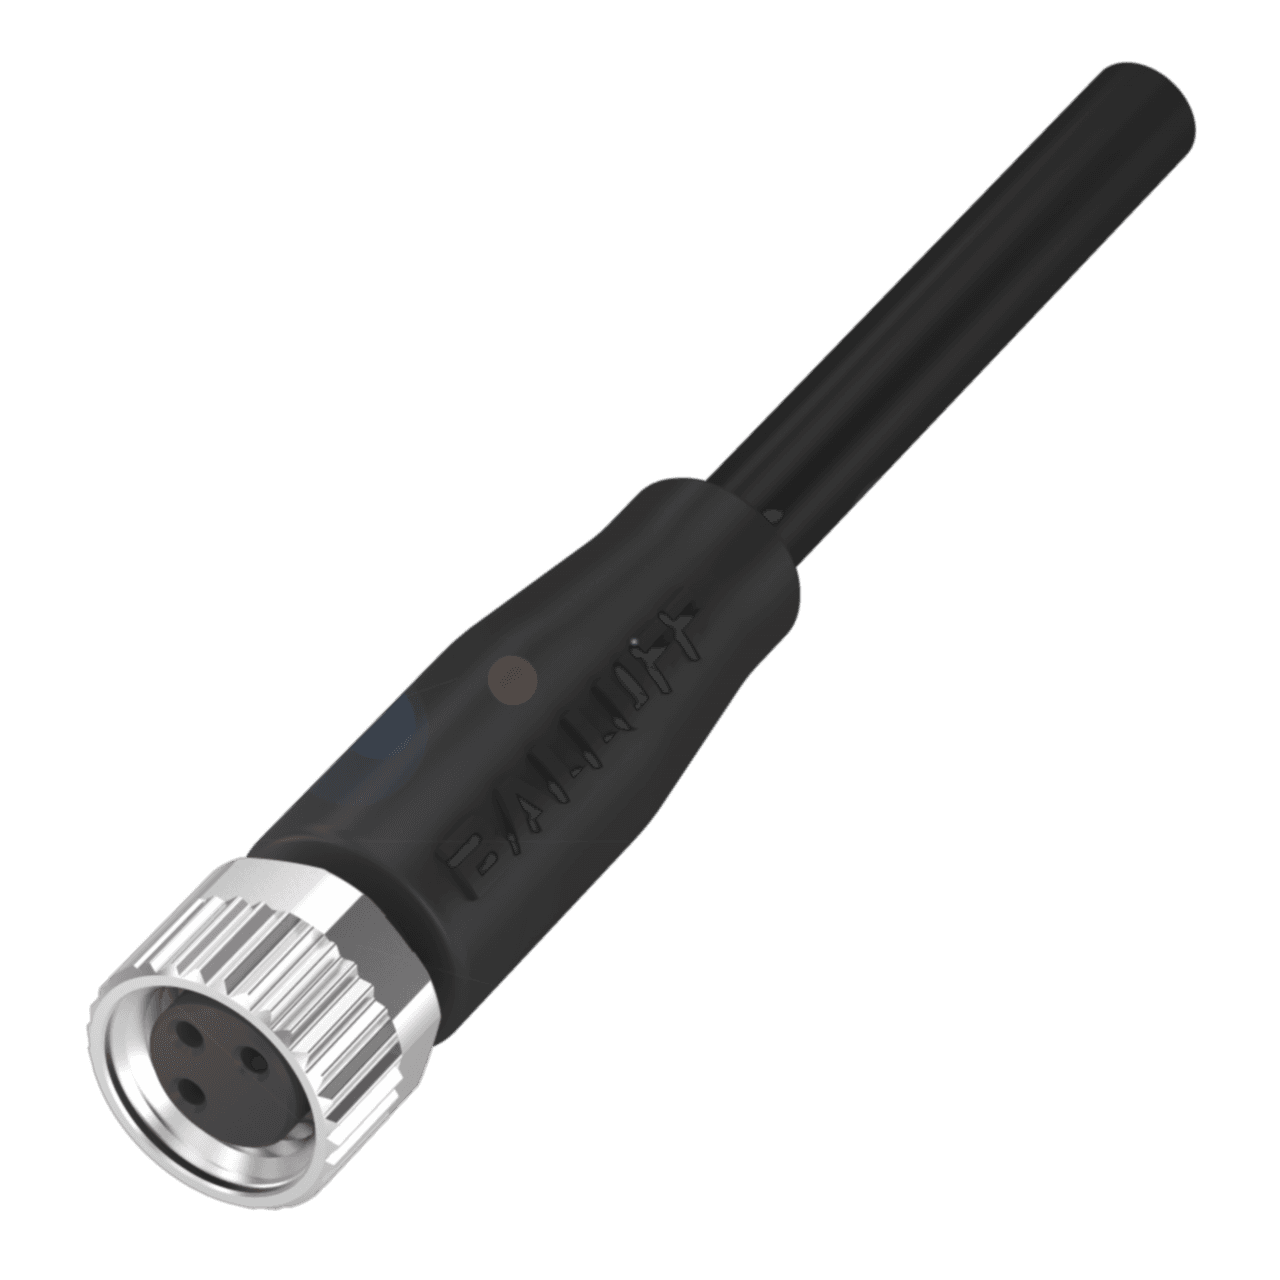 Balluff BCC02M9 Connection: M8x1-Female, Straight, 3-pin, A-coded, Cable: PUR black, 5 m, Drag chain compatible, Number of conductors: 3, Conductor cross-section: 0.34 mm², Cable temperature, fixed routing: -50...90 °C, Cable temperature, flexible routing: -25...90 °C, O